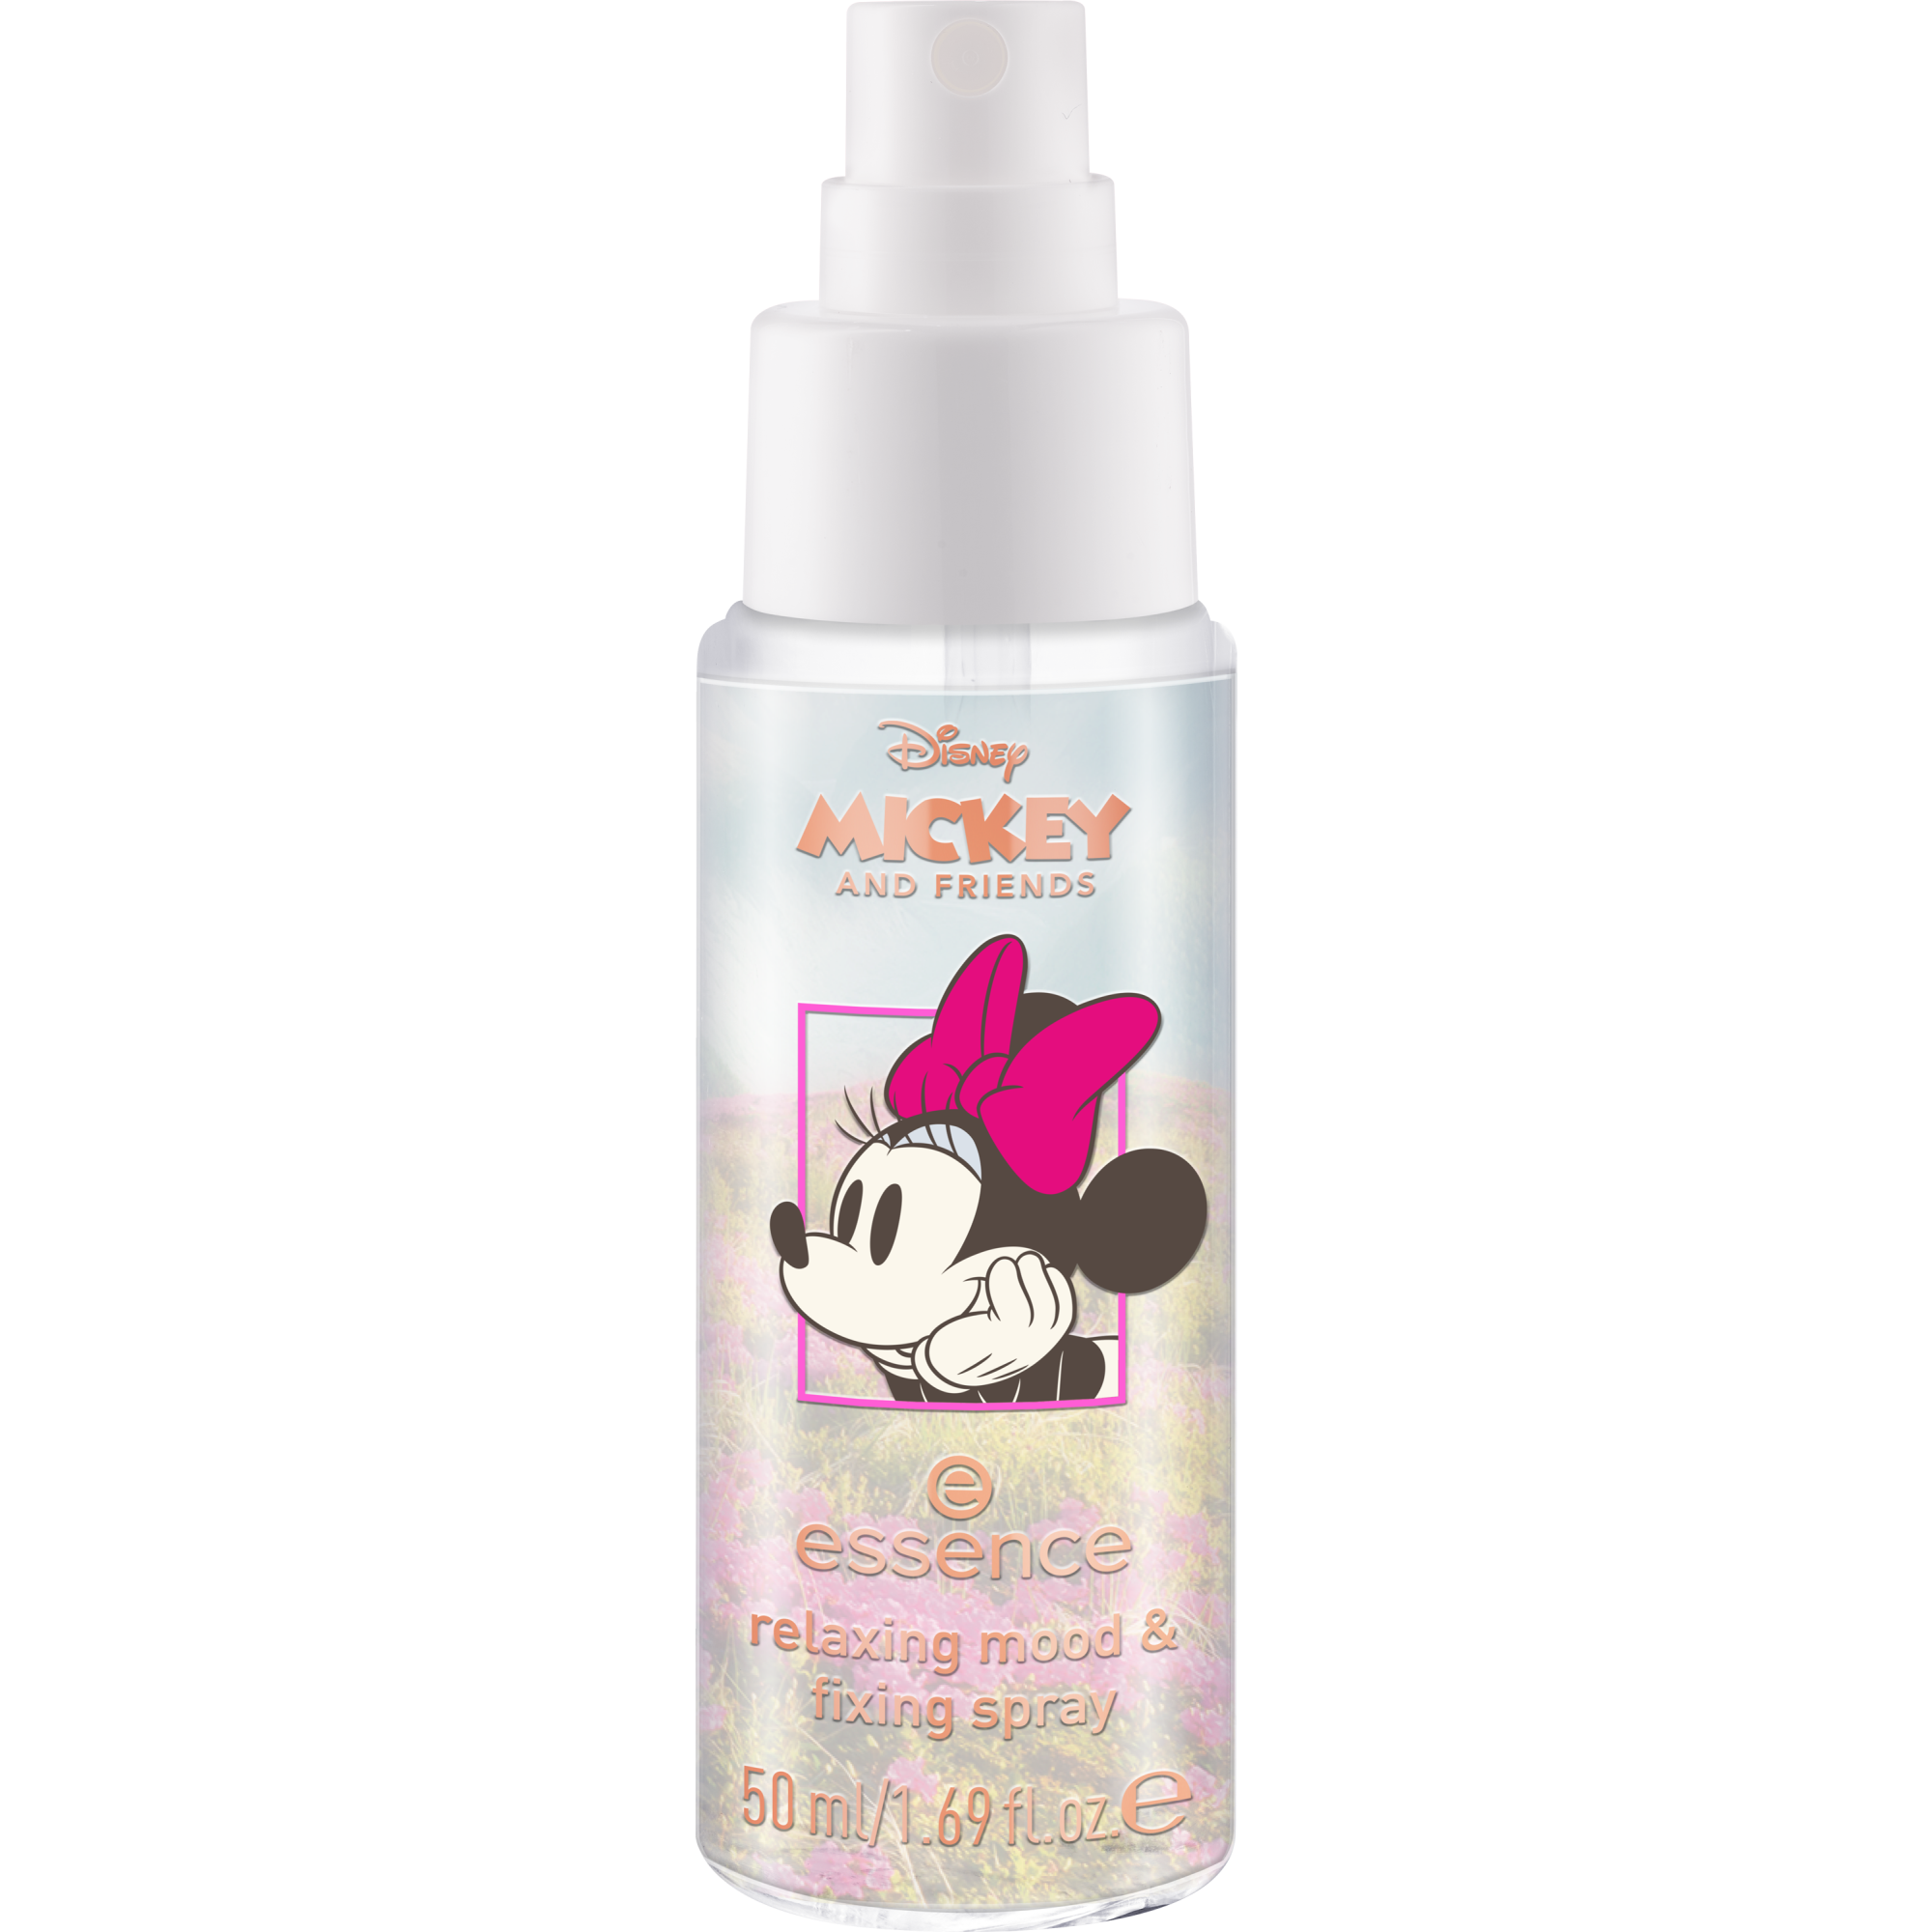 Disney Mickey and Friends relaxing mood & spray fissante